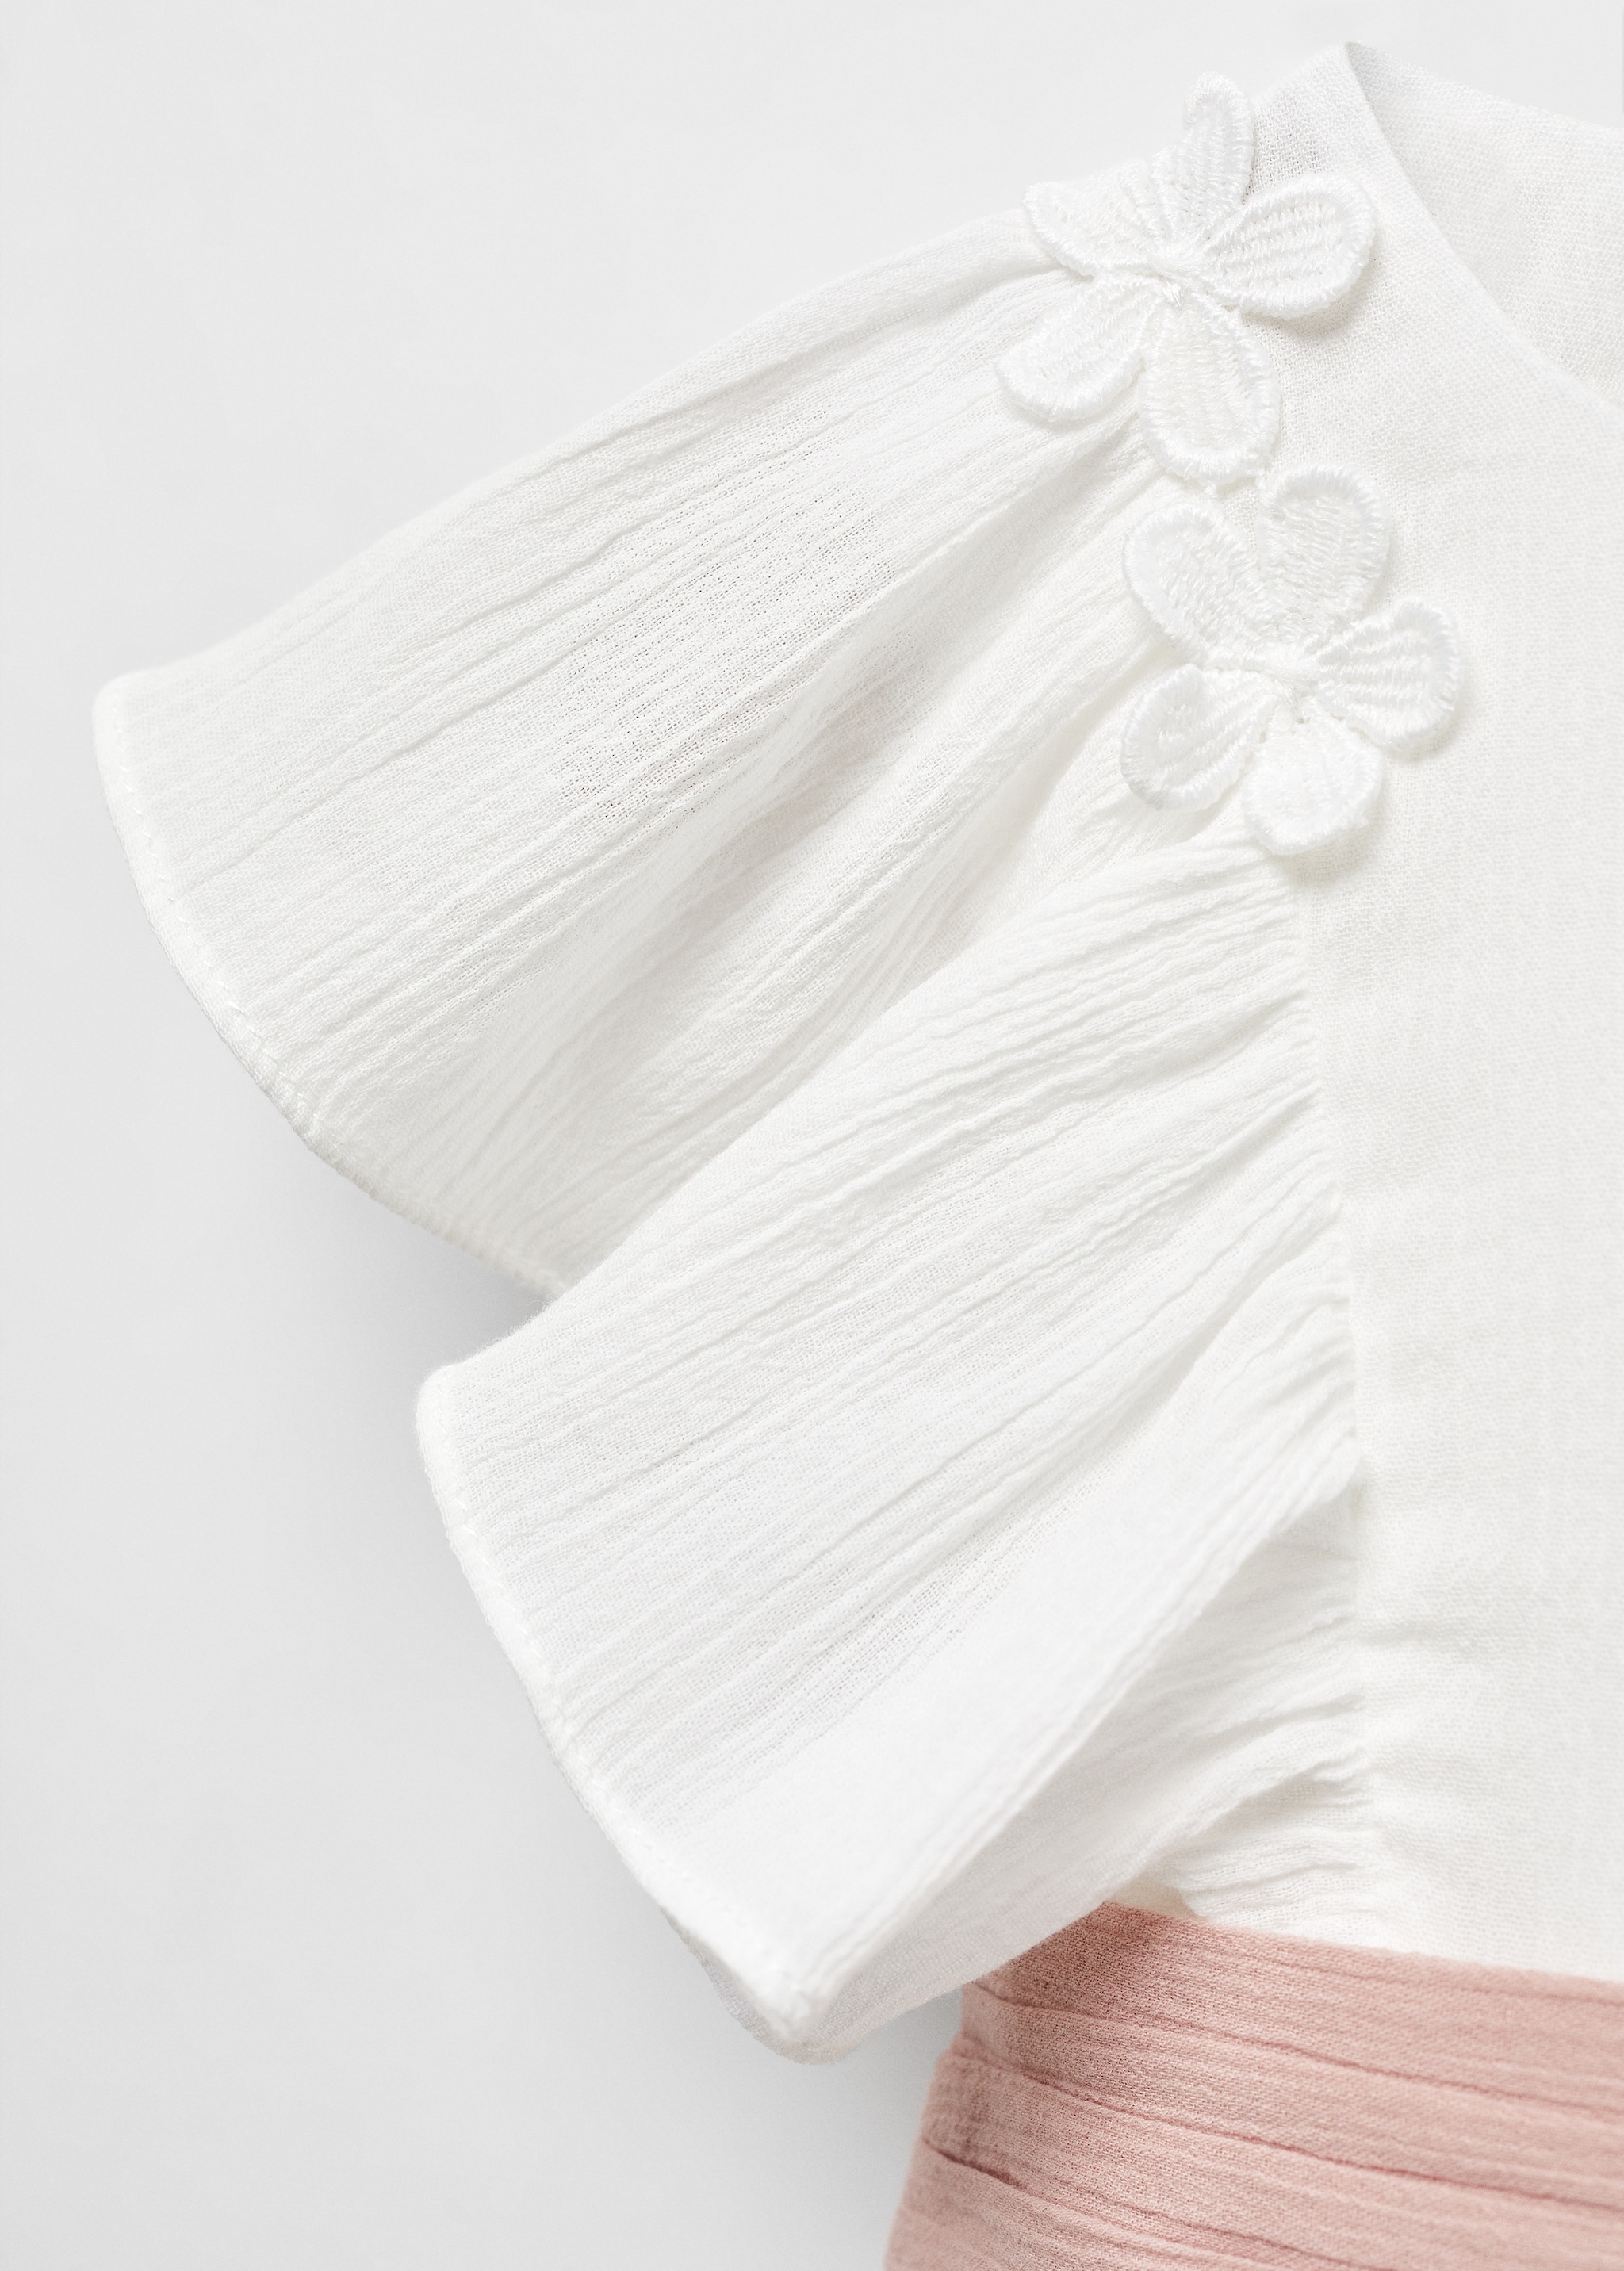 Bambula flower dress - Details of the article 8